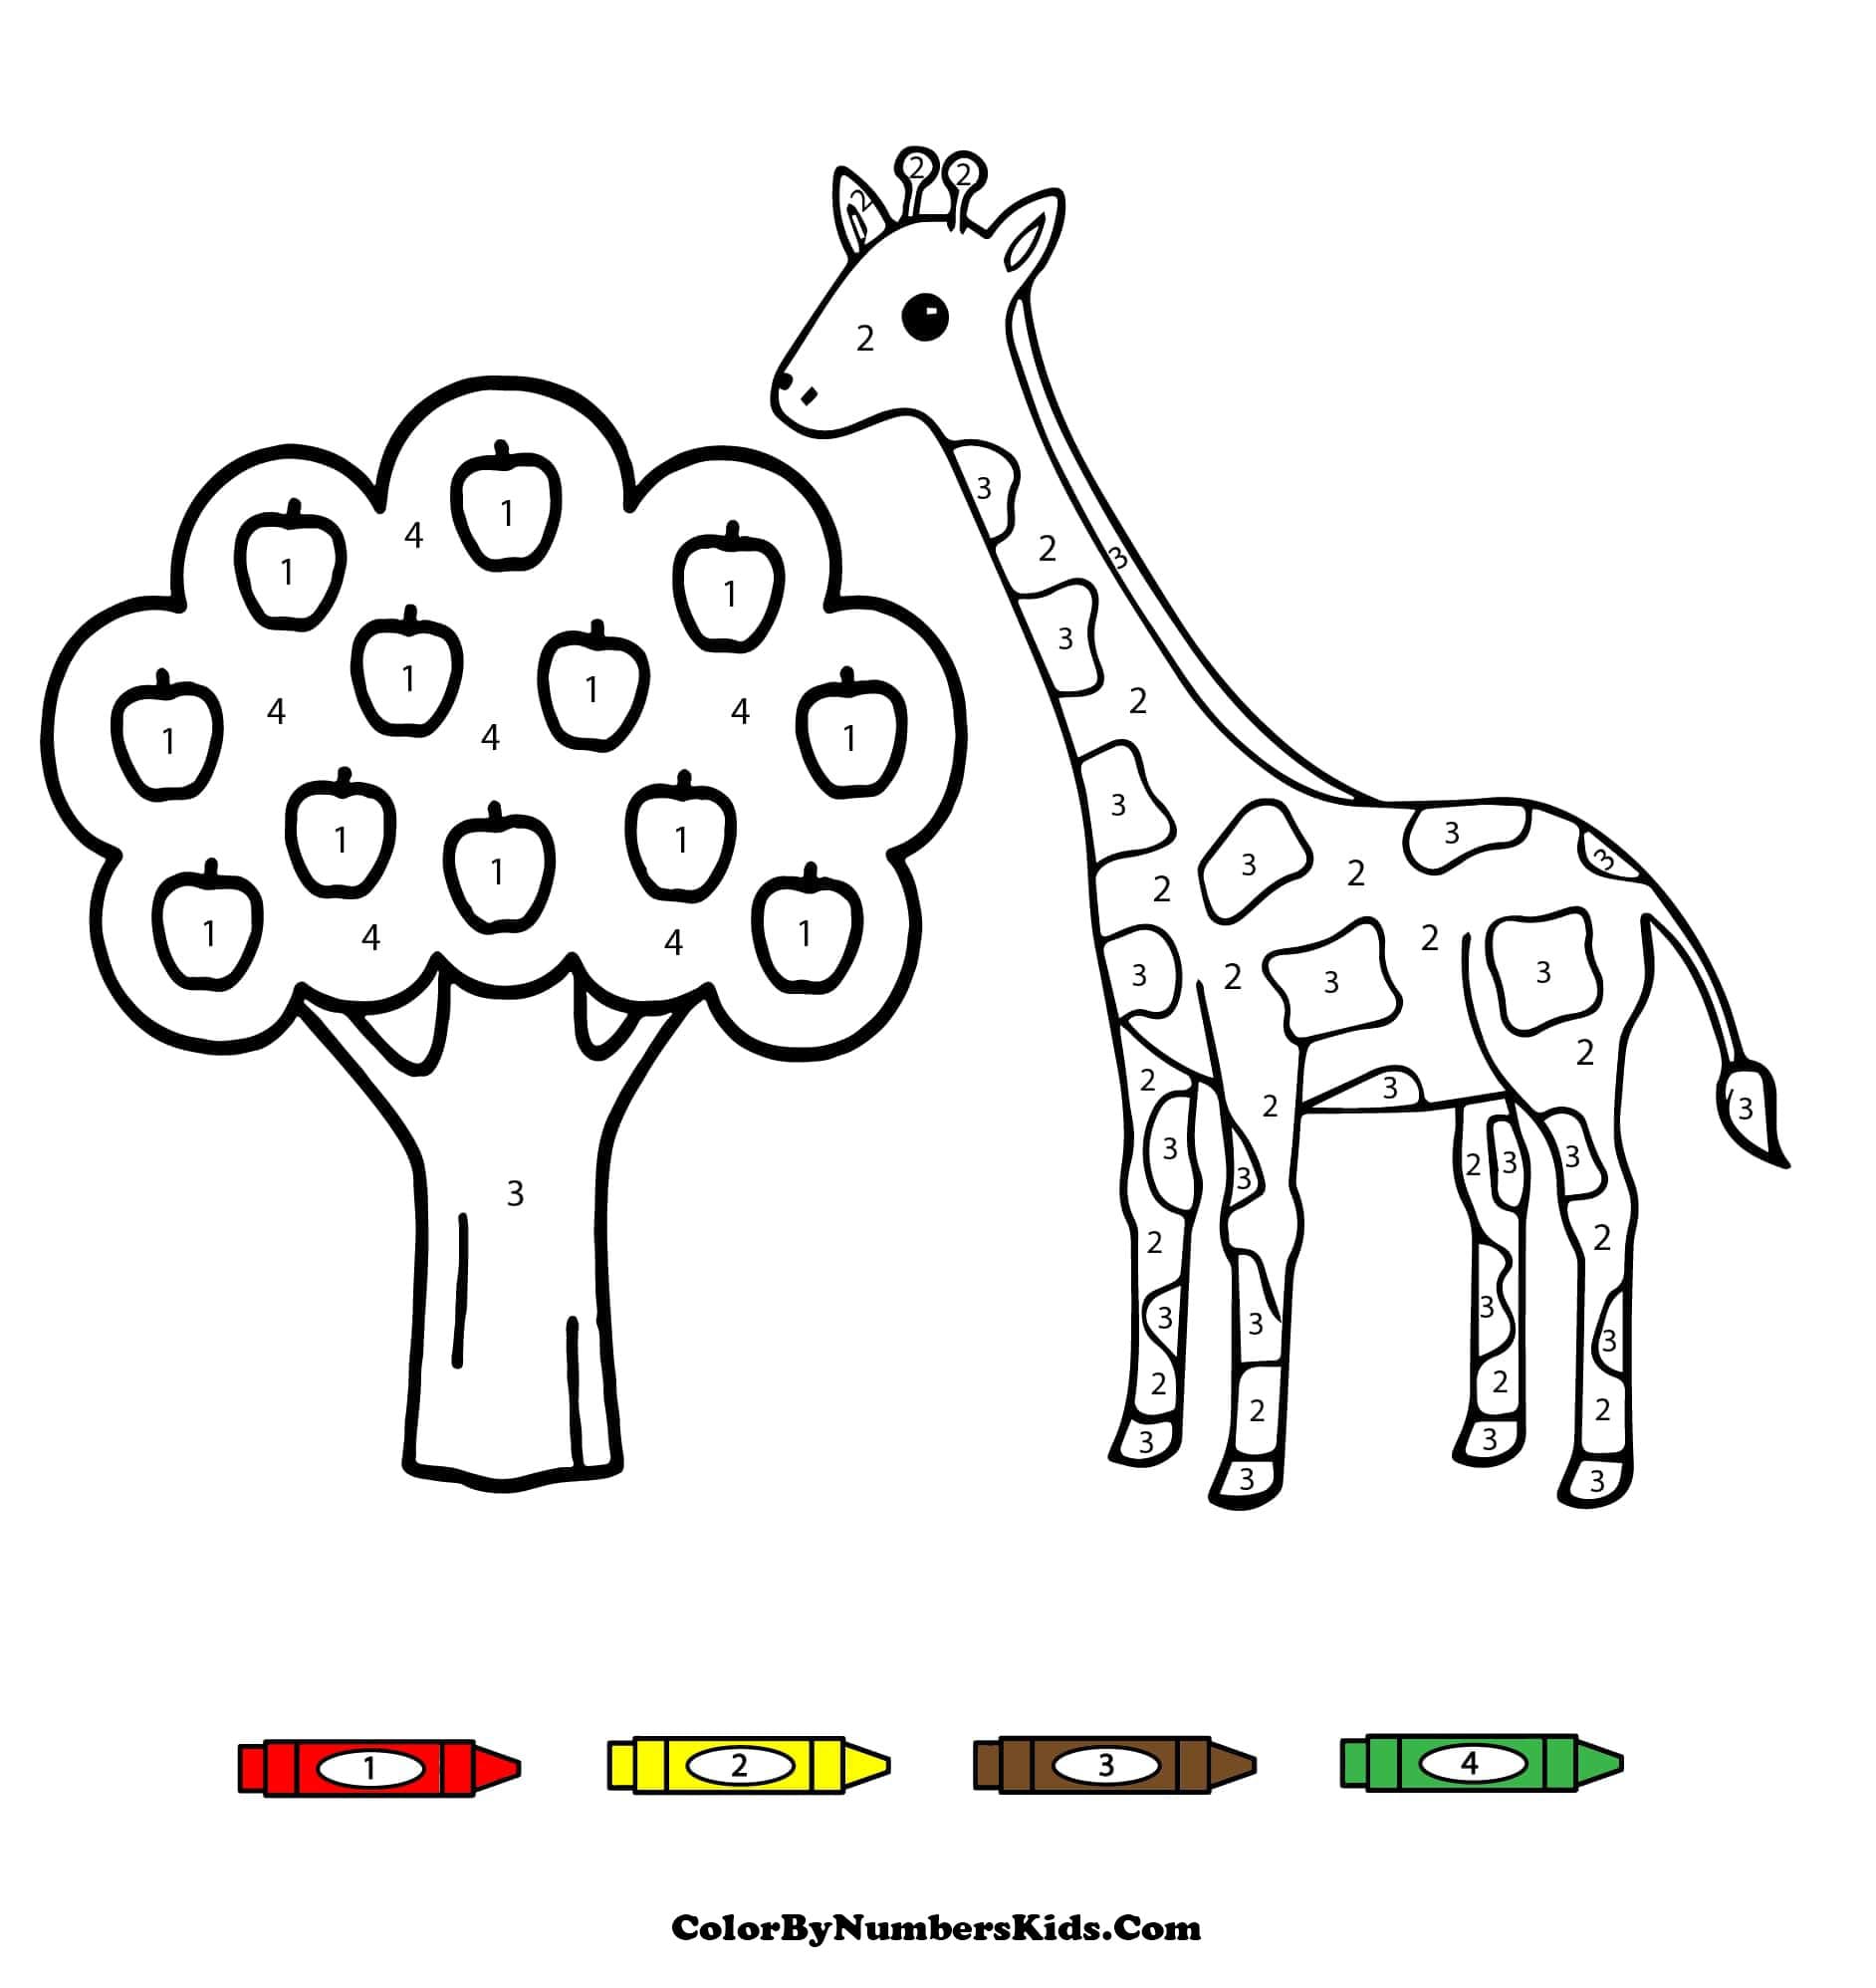 Apple Tree and Giraffe Color By Number